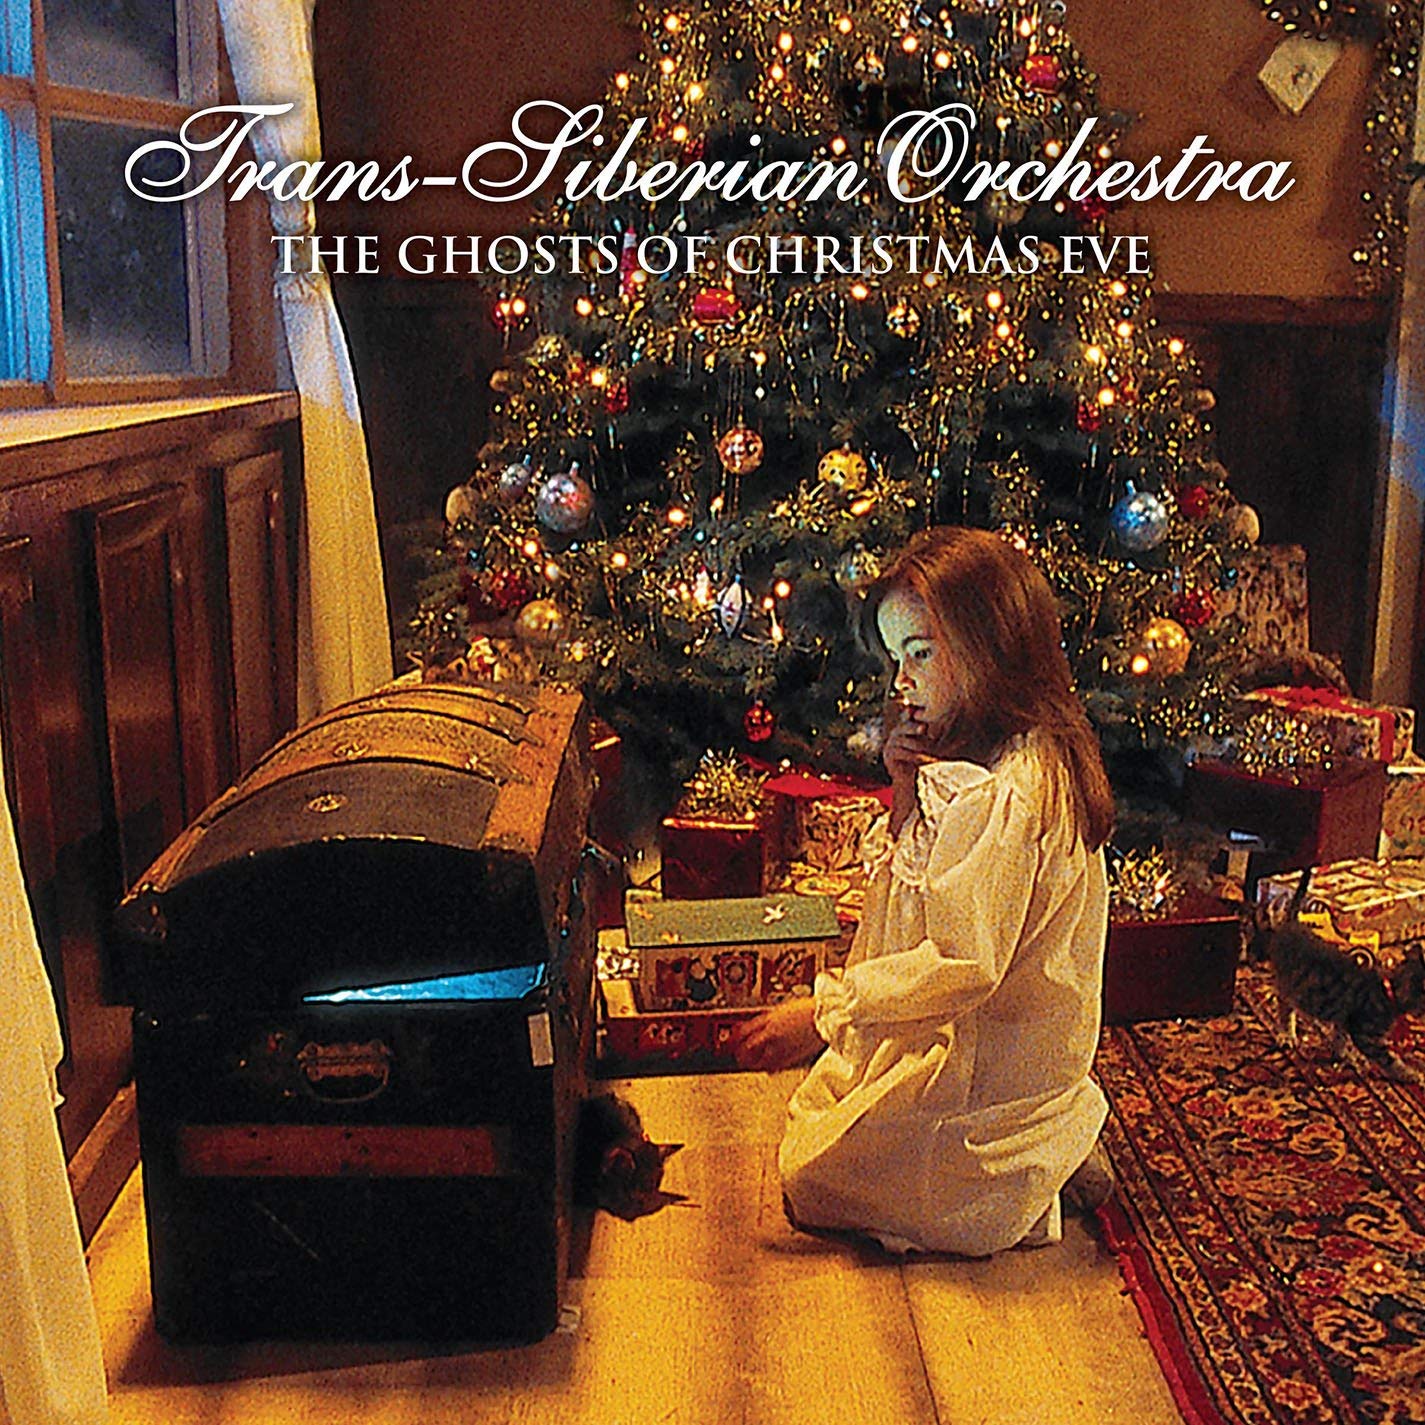 Trans-Siberian Orchestra - The Ghosts Of Christmas Eve - Amazon.com ...